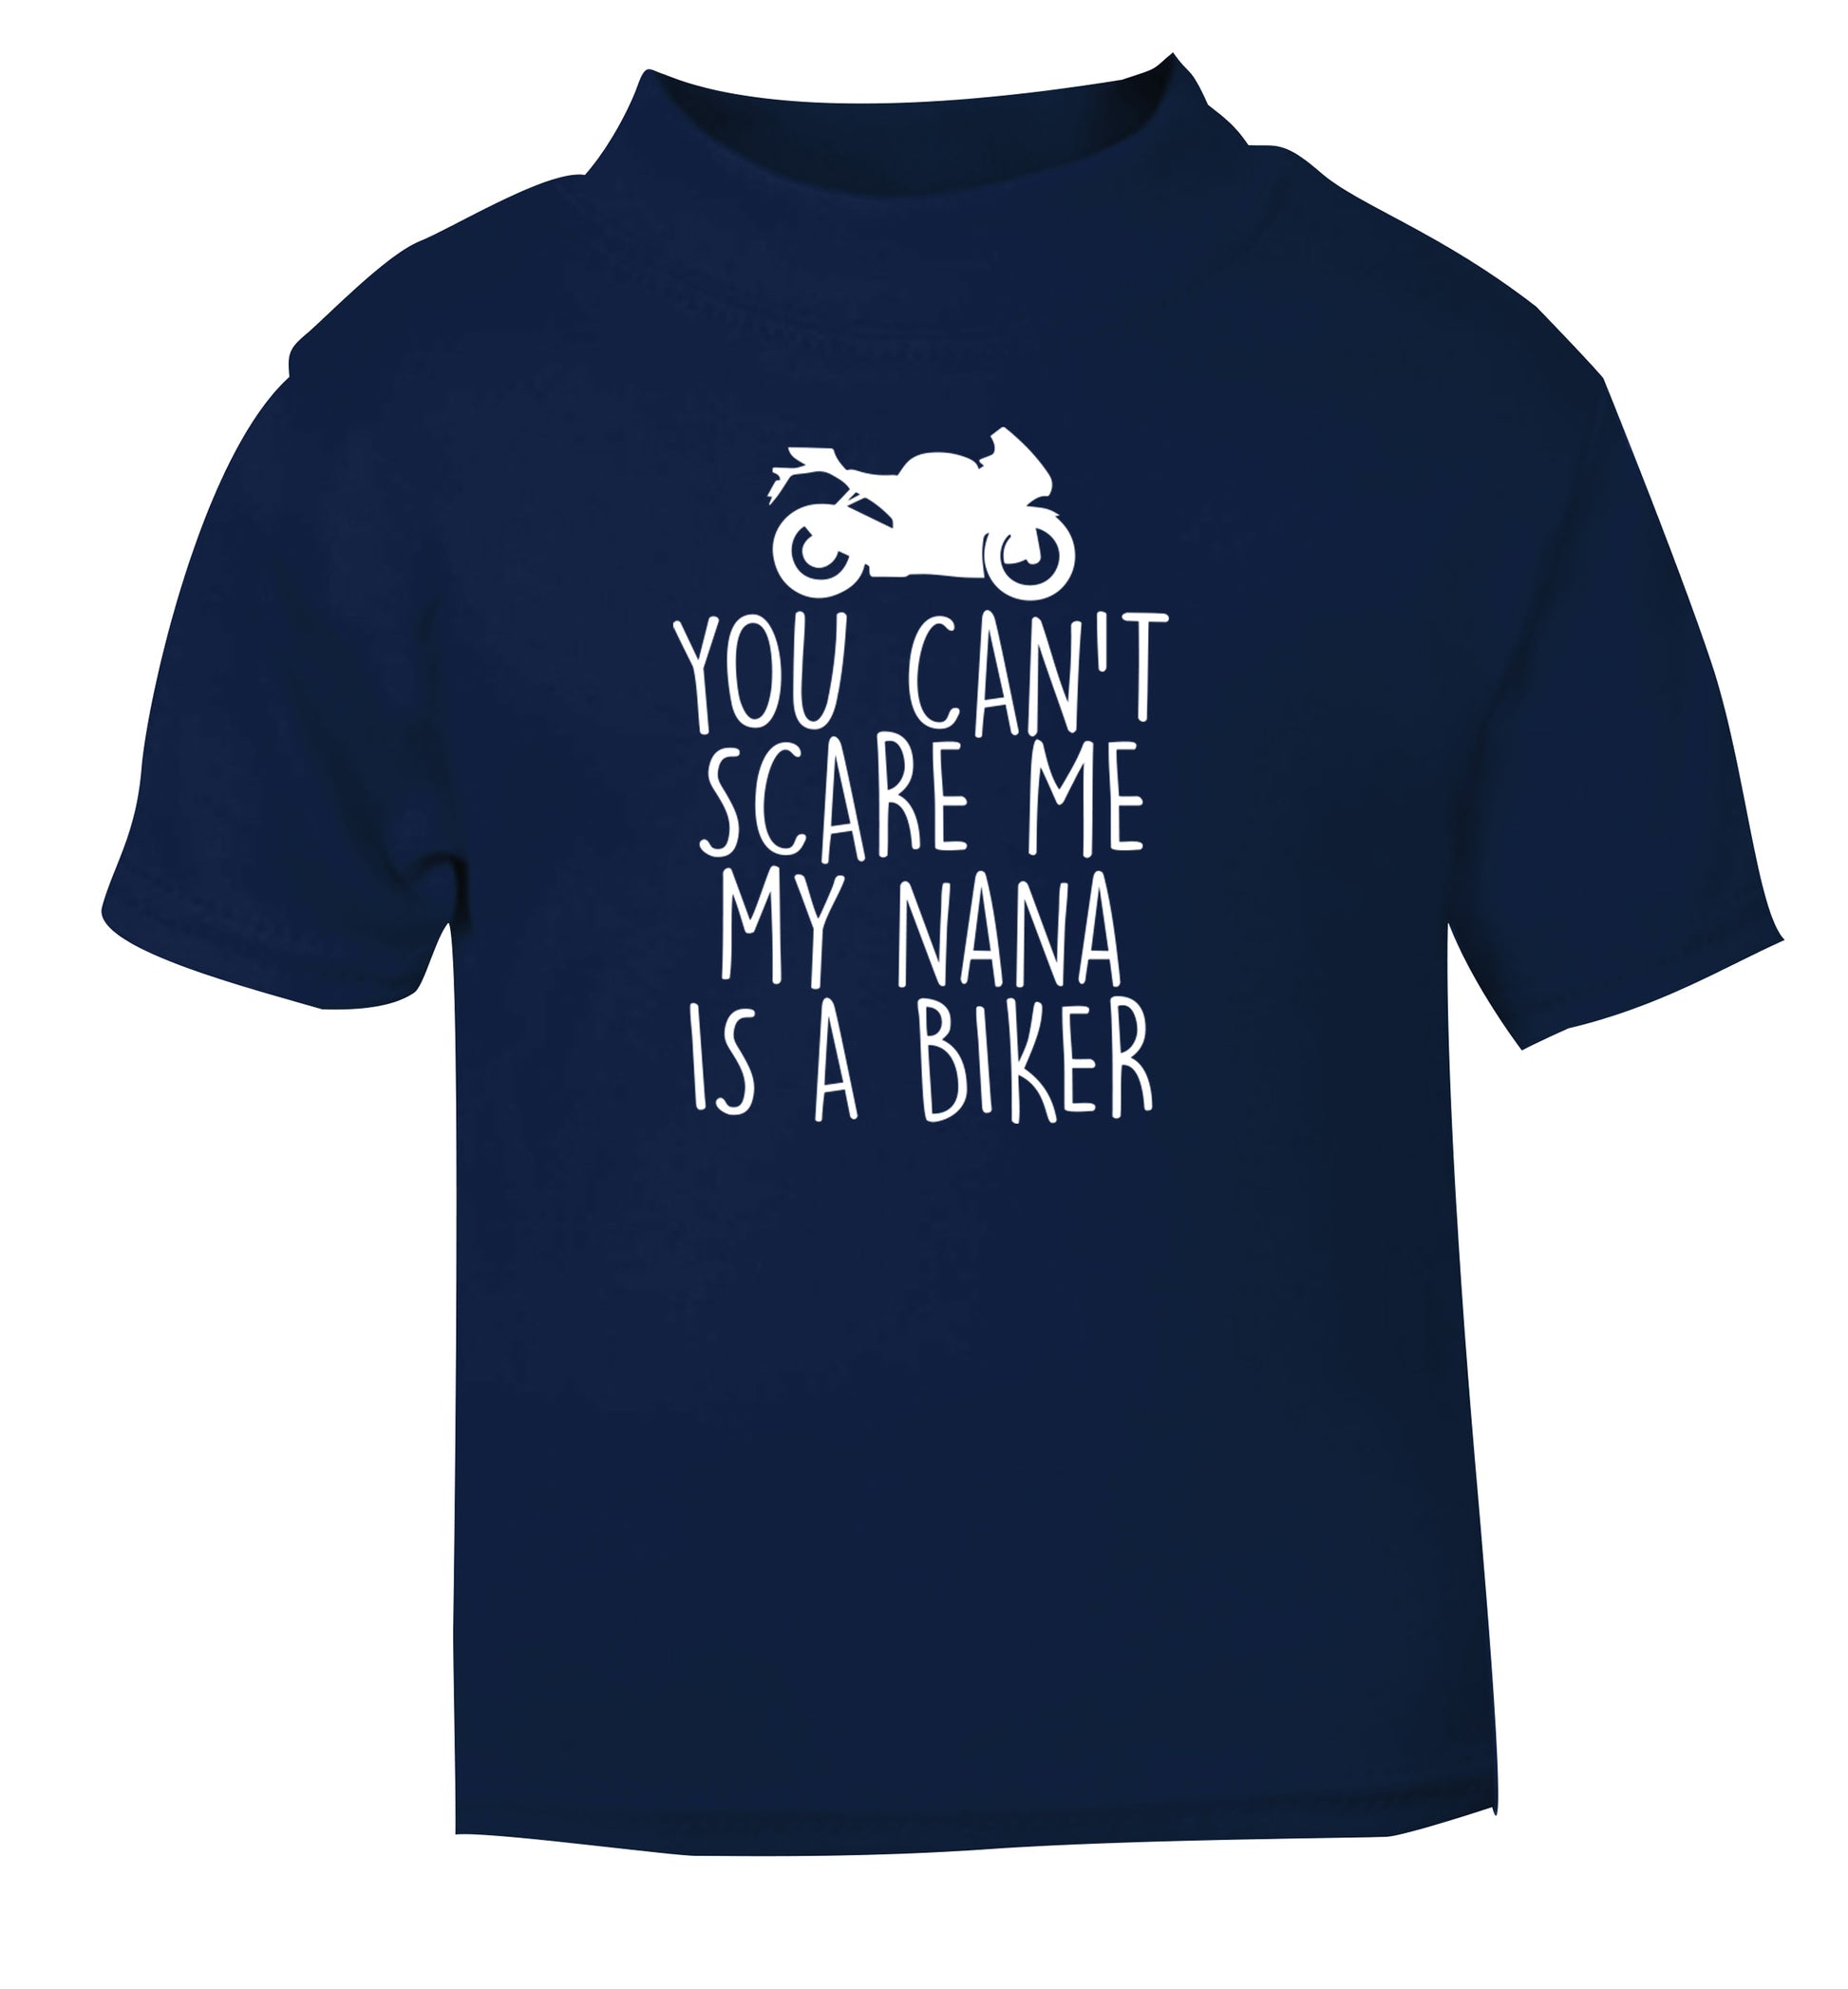 You can't scare me my nana is a biker navy Baby Toddler Tshirt 2 Years